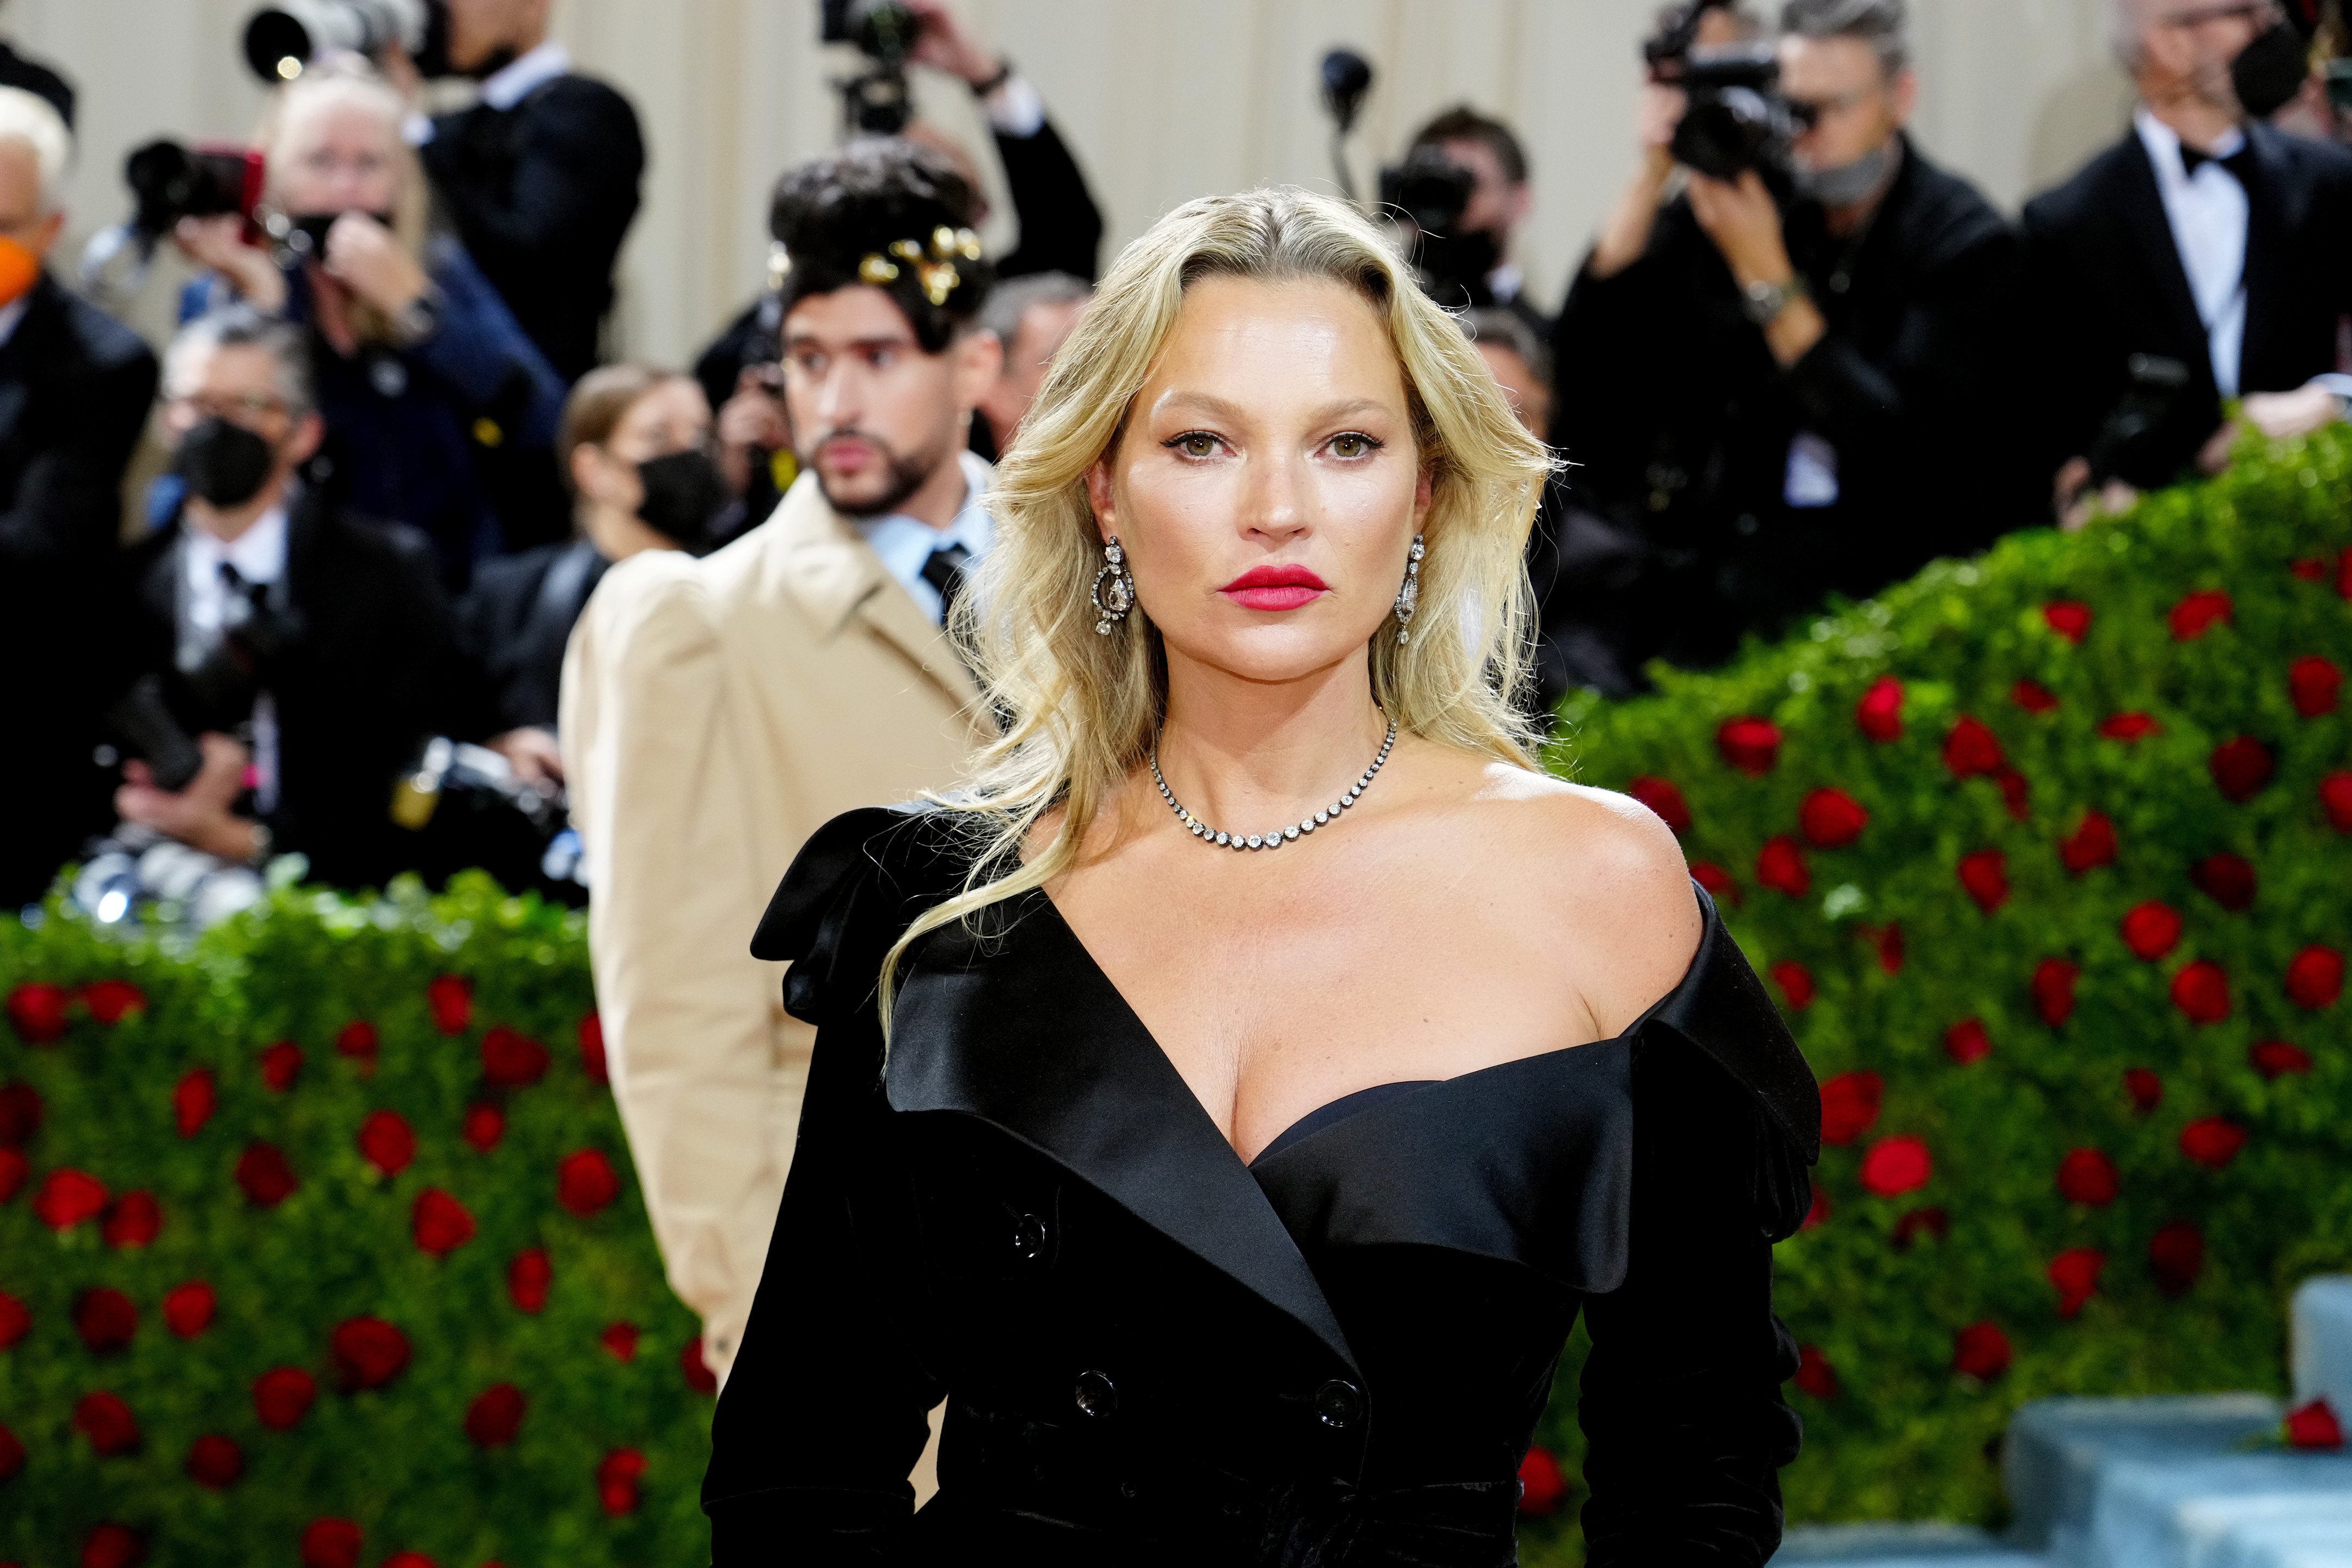 Kate Moss, who owns a beautiful mansion in London, poses for photos at the 2022 Met Gala